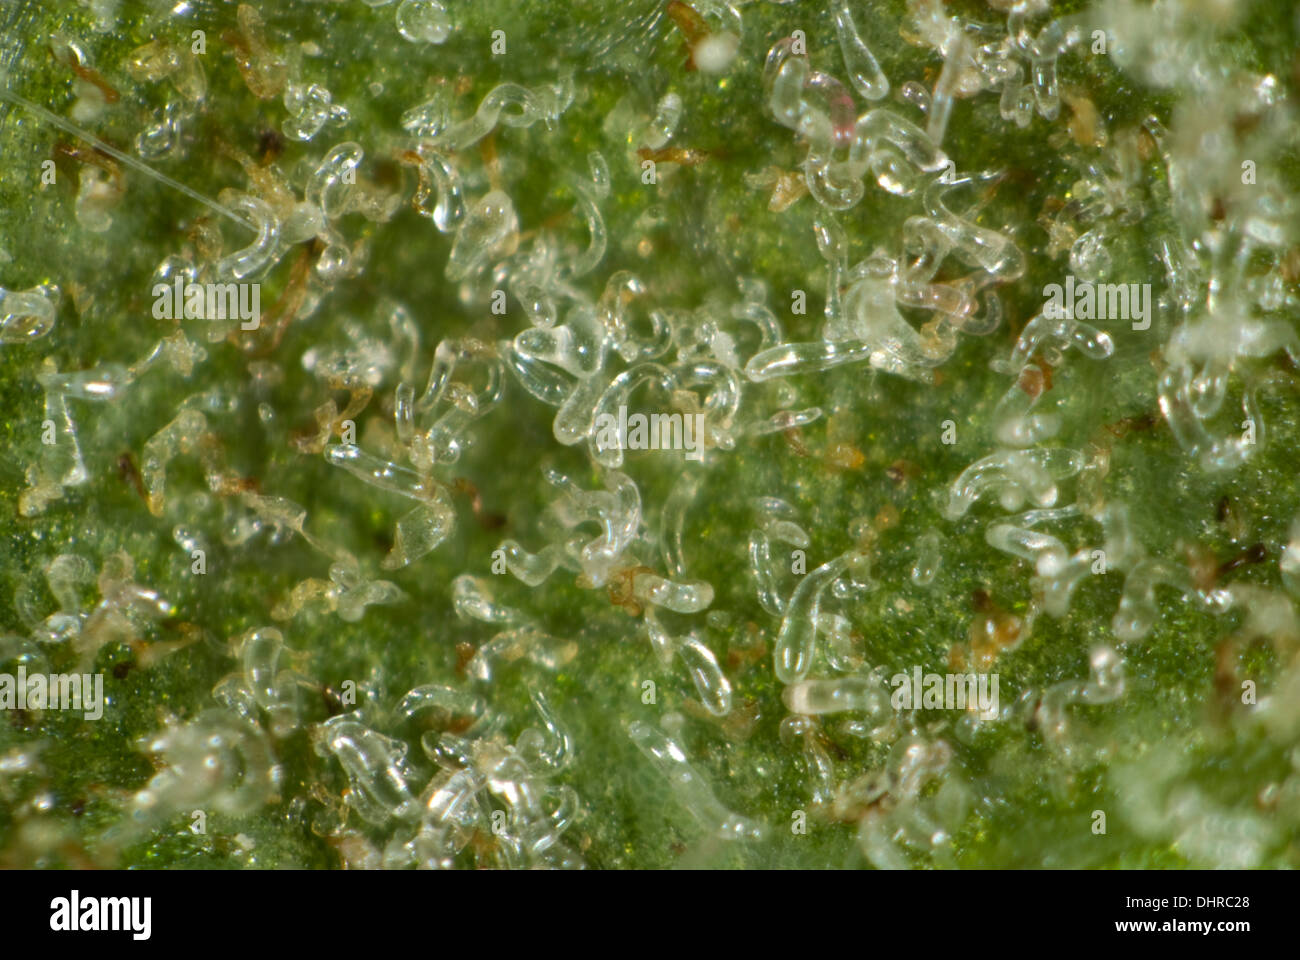 Colony of gall mites, Aceria pseudoplatani, on the underside of a sycamore leaf Stock Photo